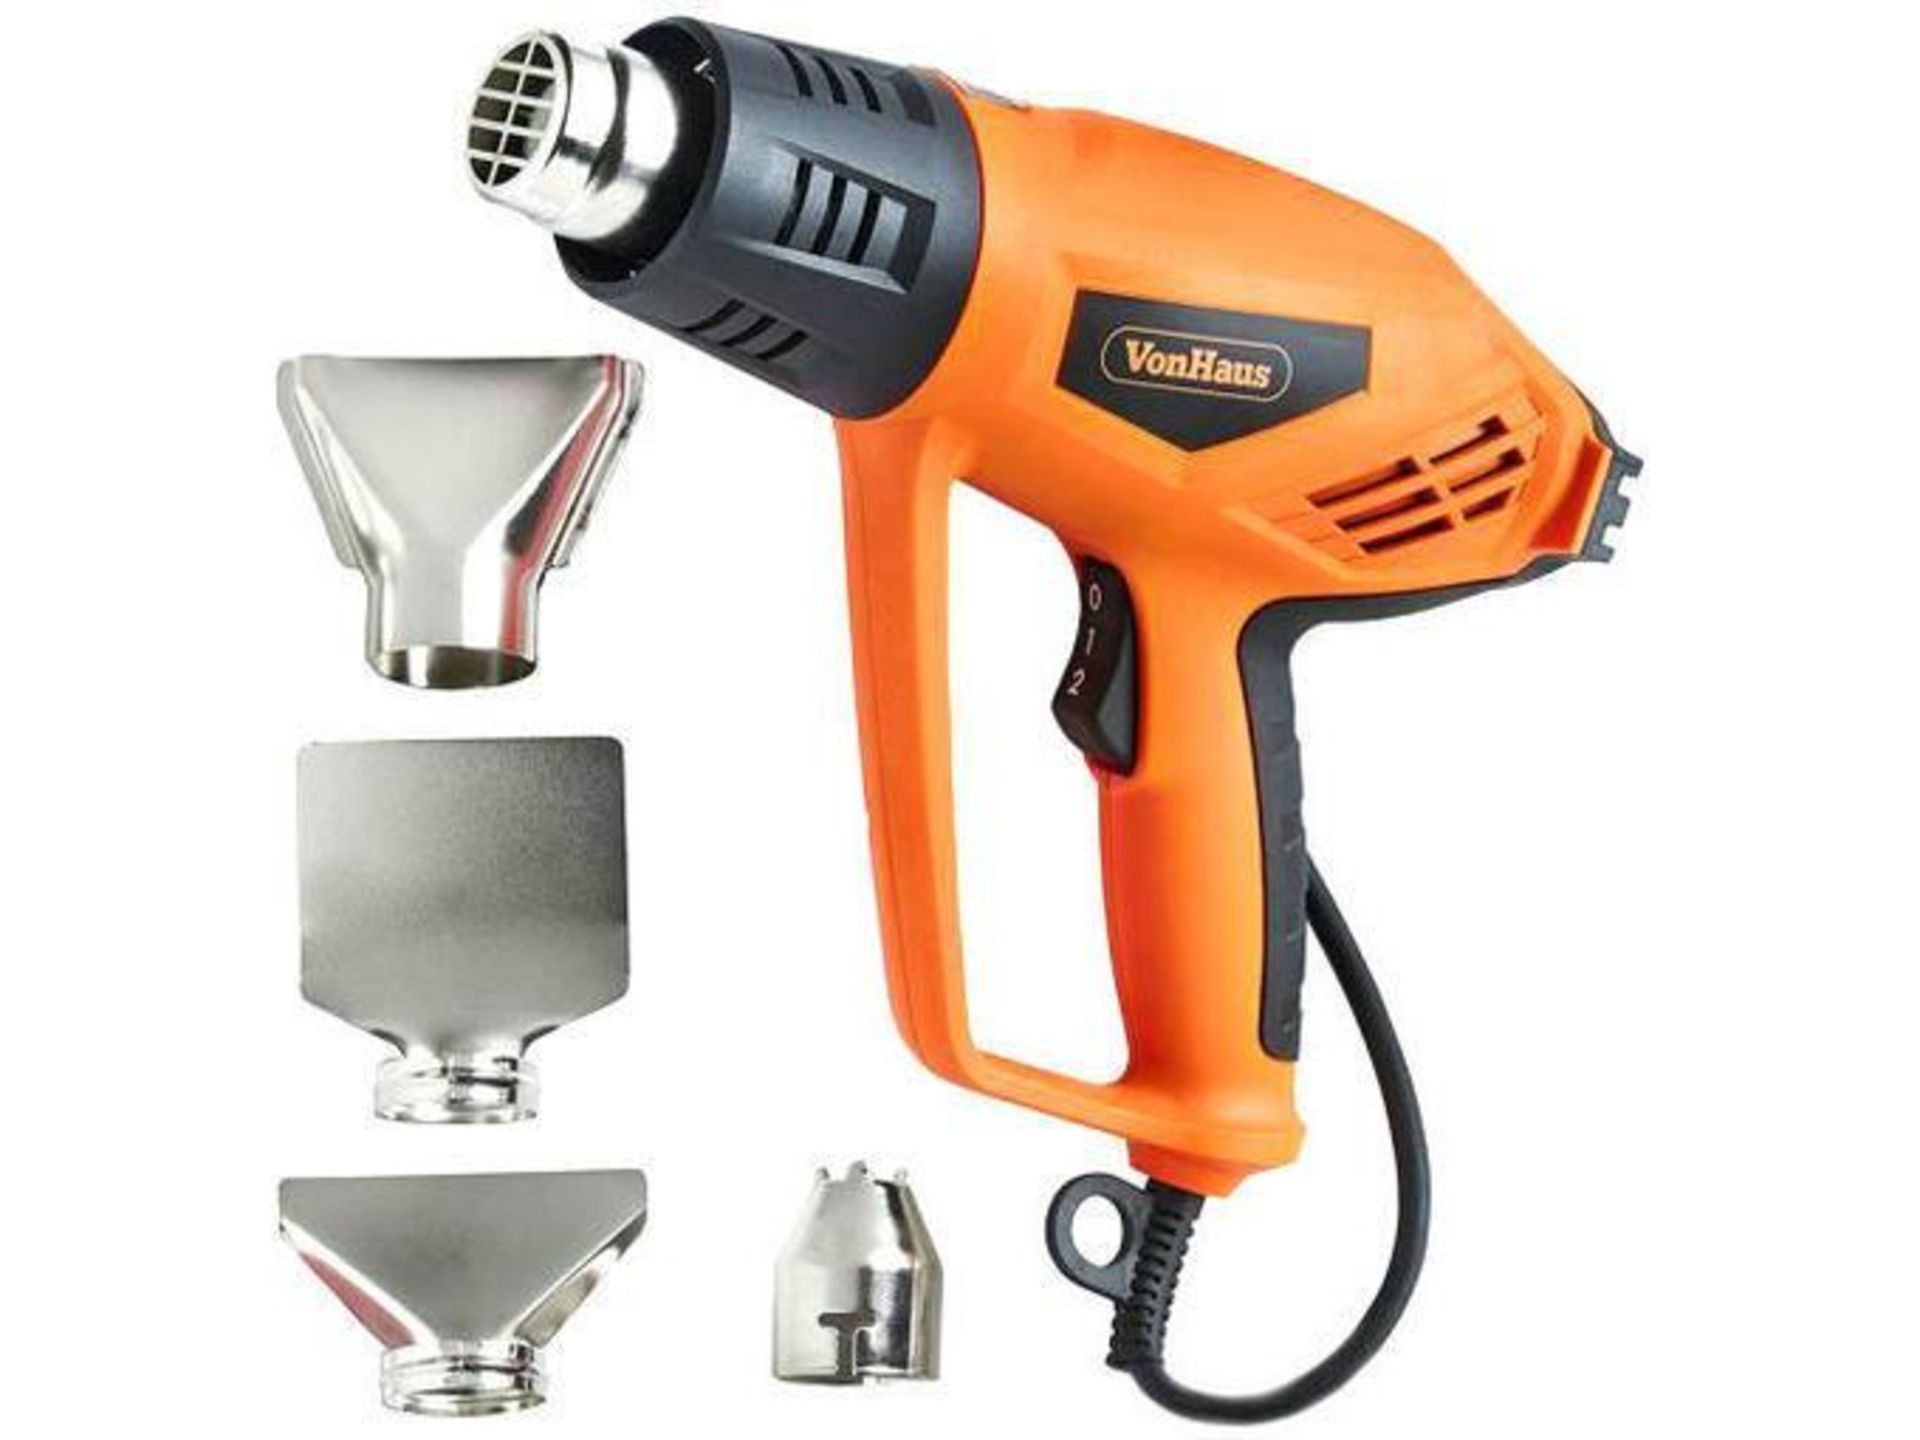 2000W Heat Gun (ER51) Ever tried scraping off paint or taking up vinyl flooring with hand tools